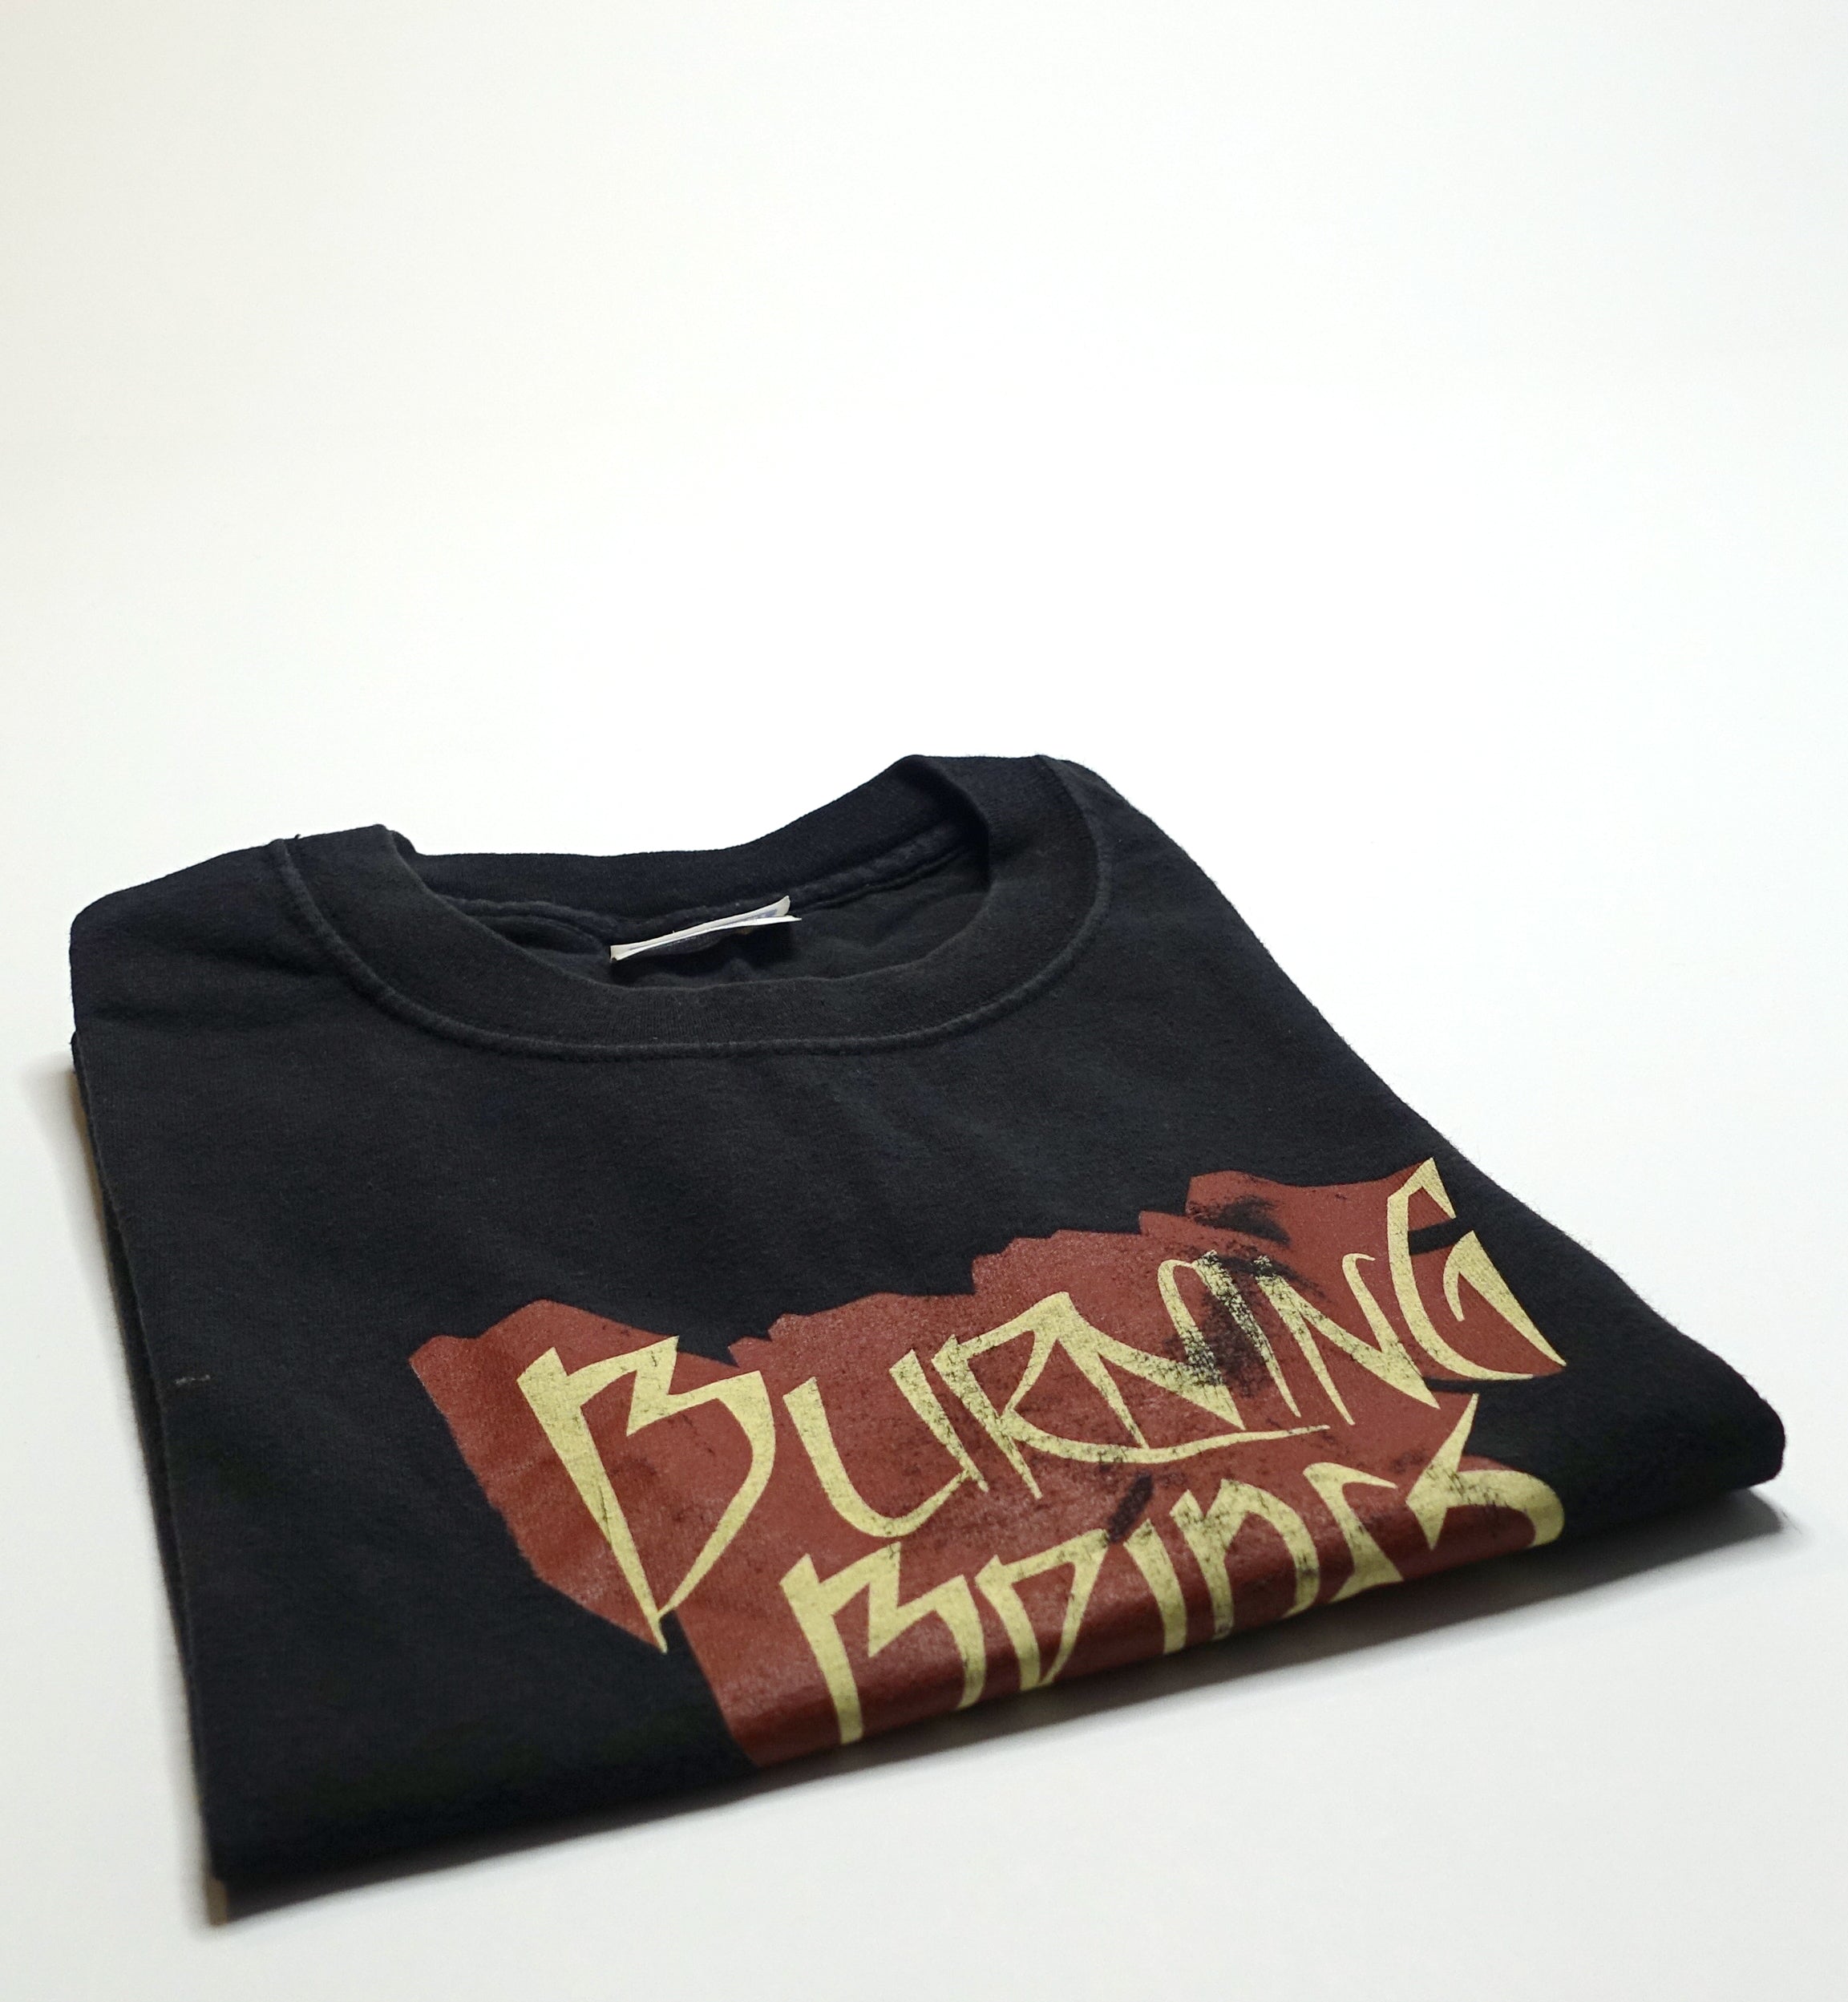 Burning Brides ‎– Leave No Ashes 2004 Tour Shirt Size Small